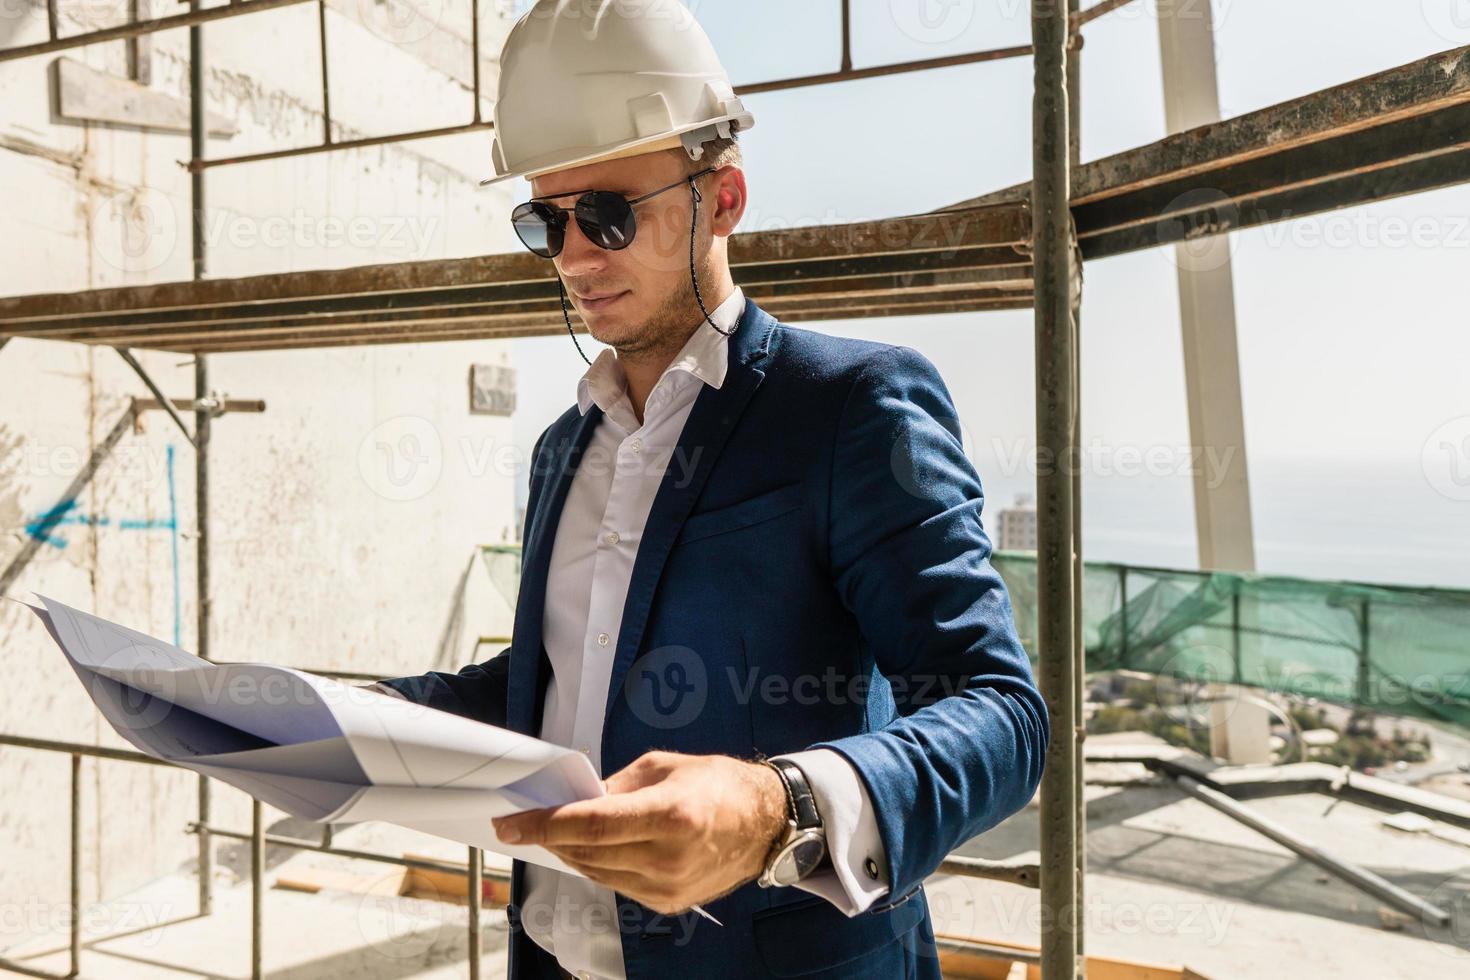 Architect wearing formal suit and hard hatholding a blueprints on a construction site photo